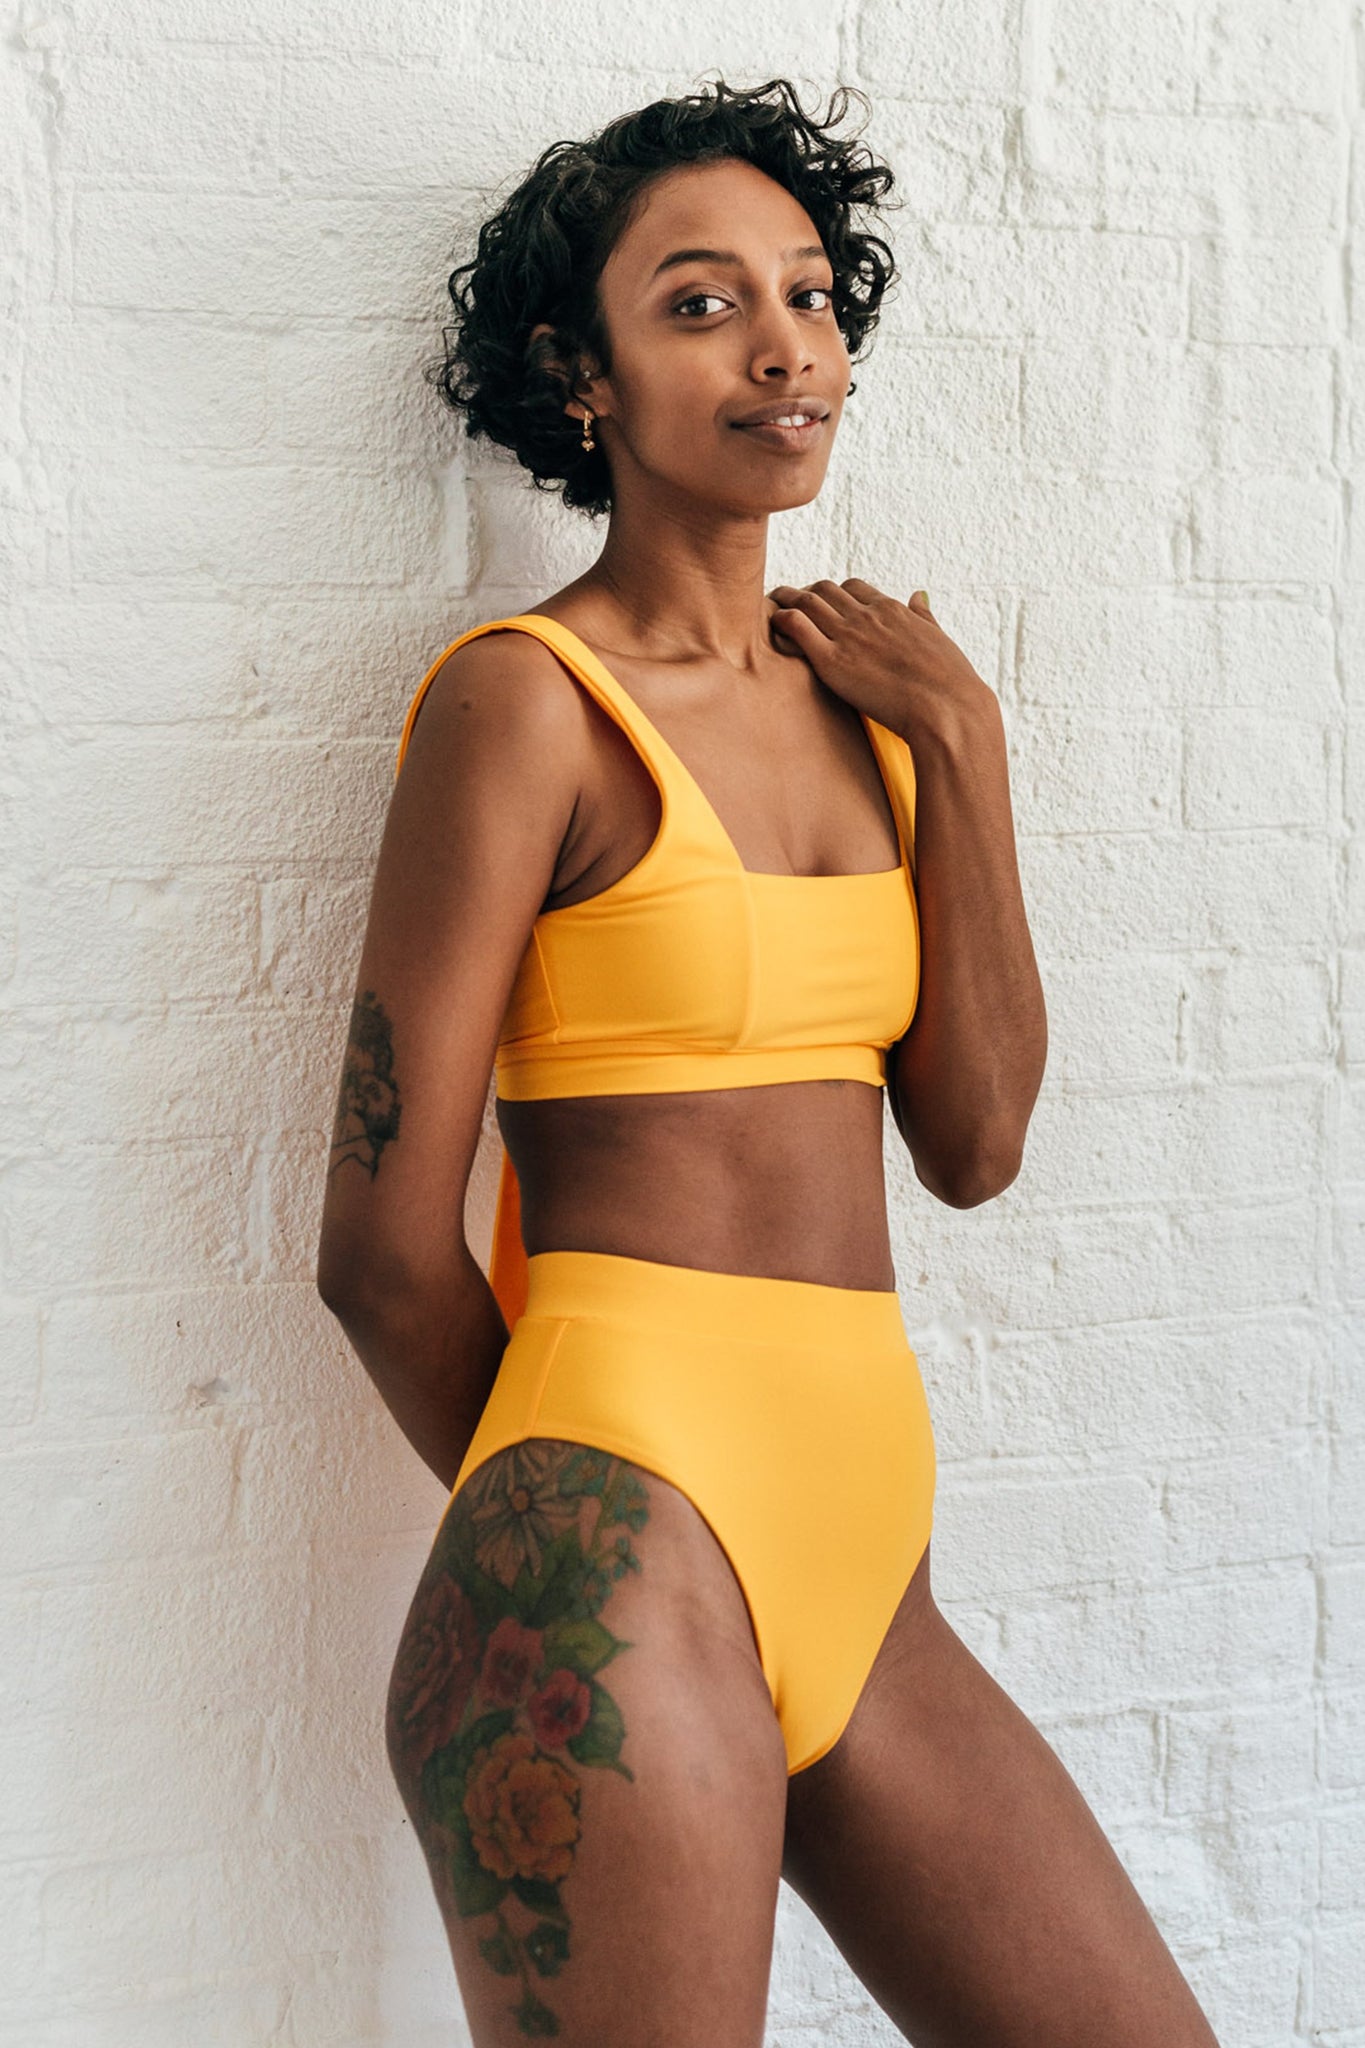 A woman leaning against a white wall wearing high waisted full coverage yellow bikini bottoms and a matching yellow bikini top with a square neckline.